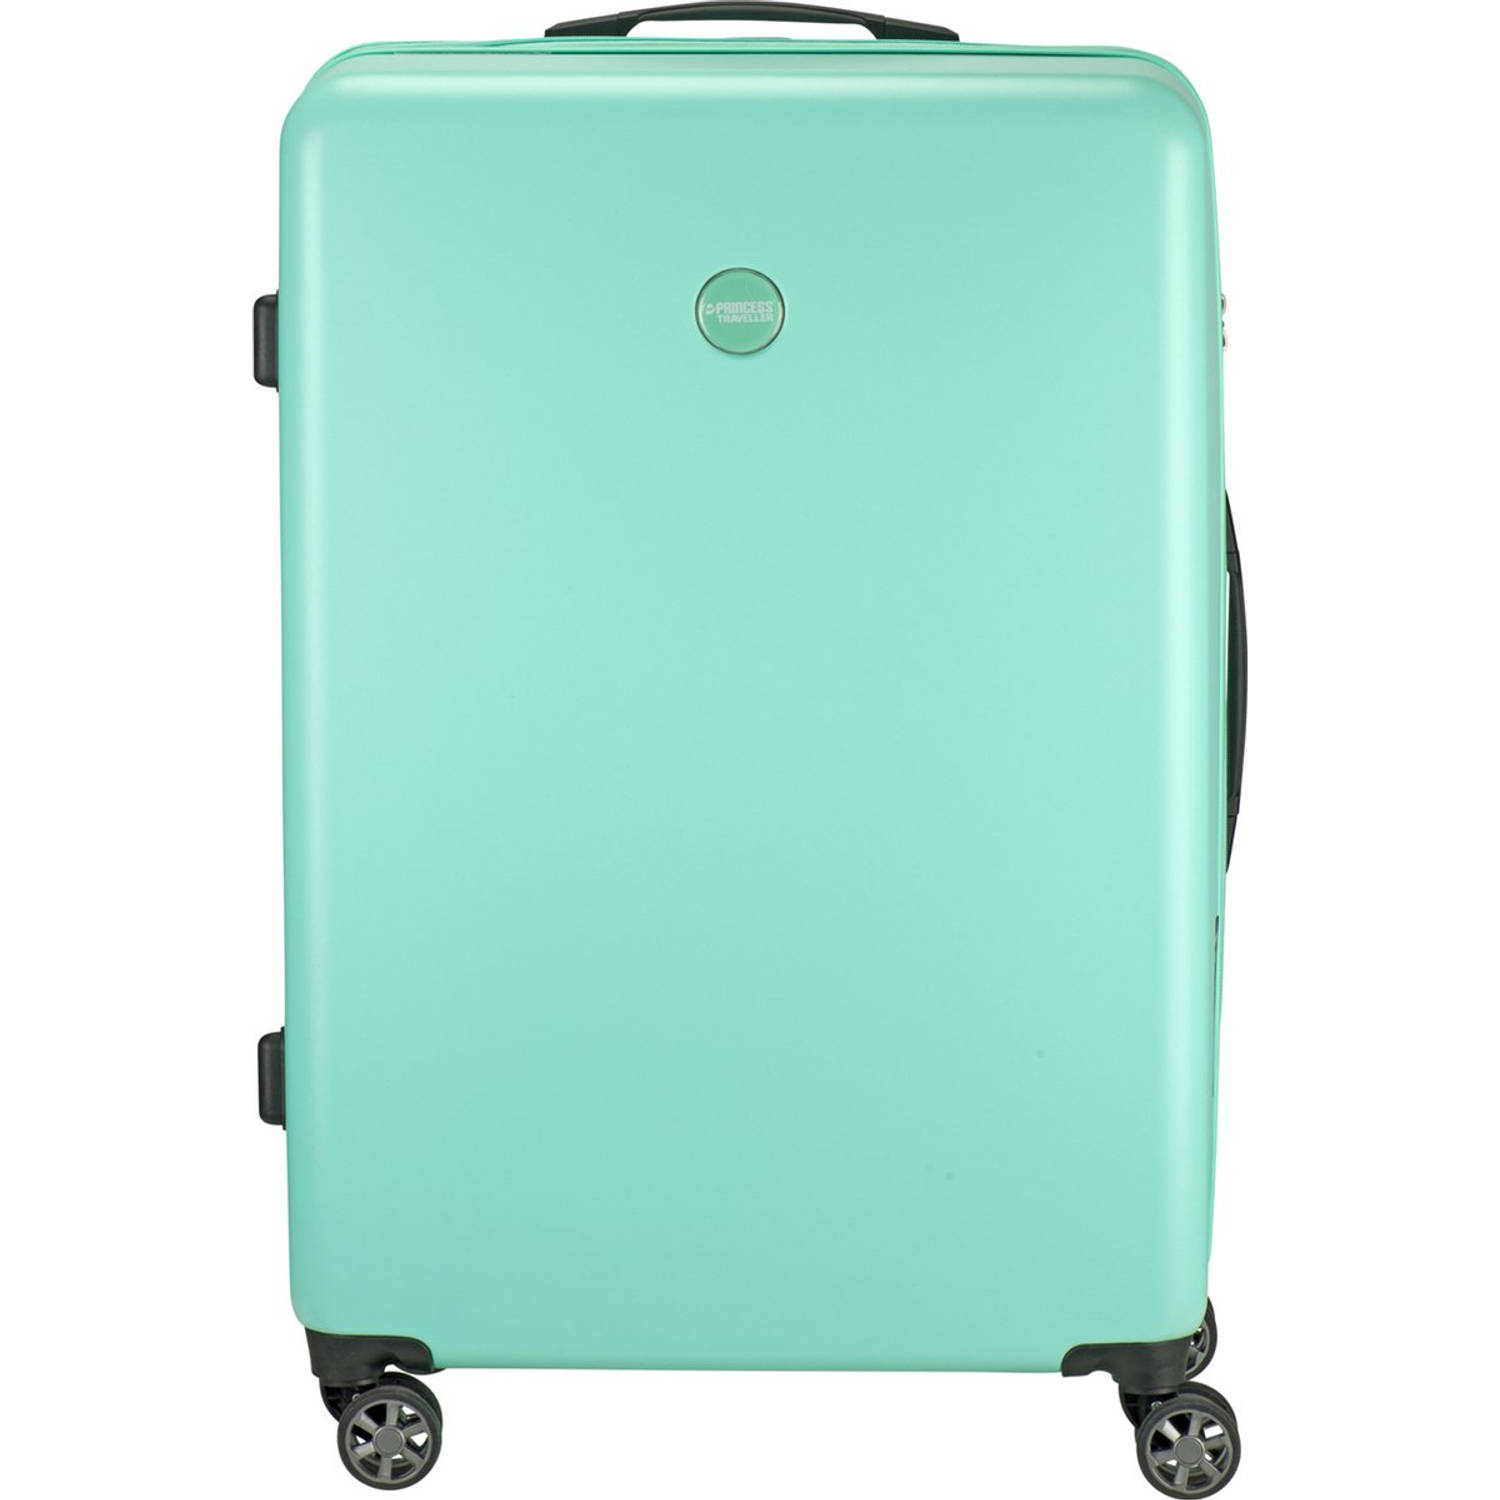 Princess Traveller PT-01 Deluxe Large Trolley pacific mint Harde Koffer